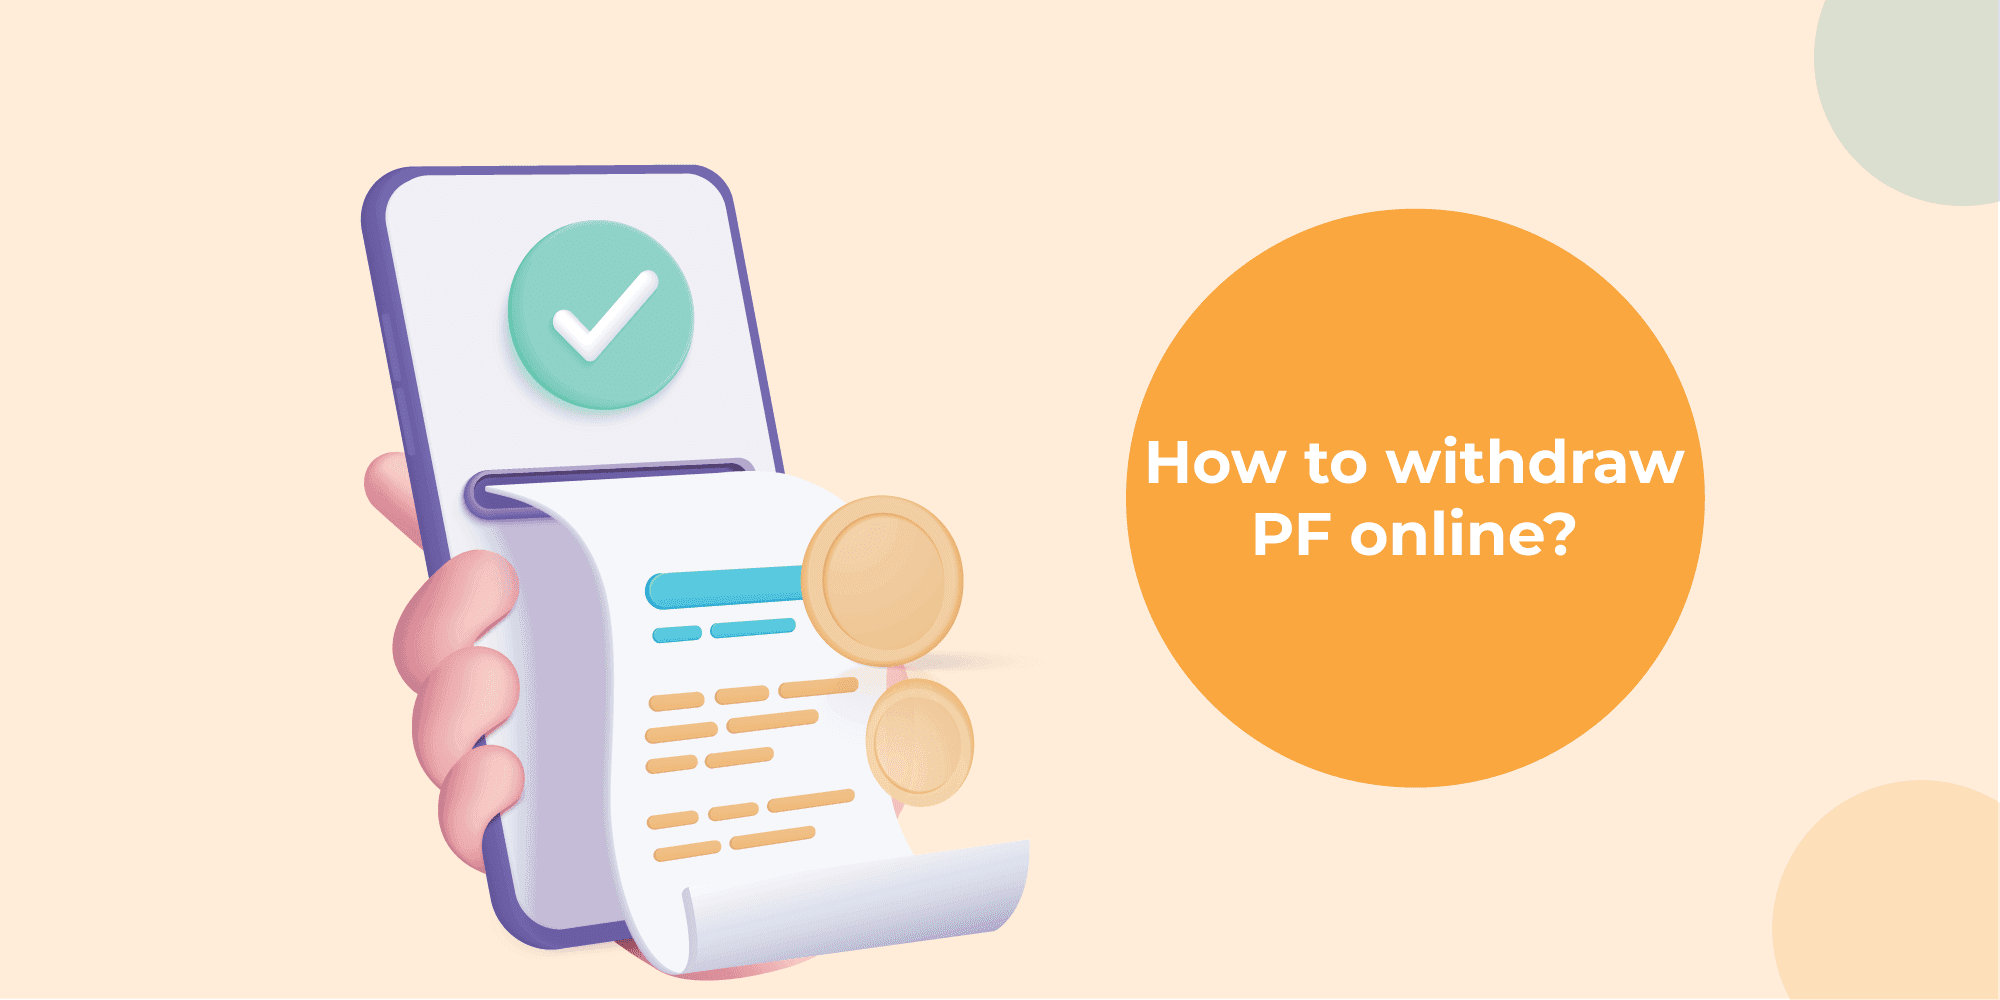 Steps to apply for withdrawal of PF online